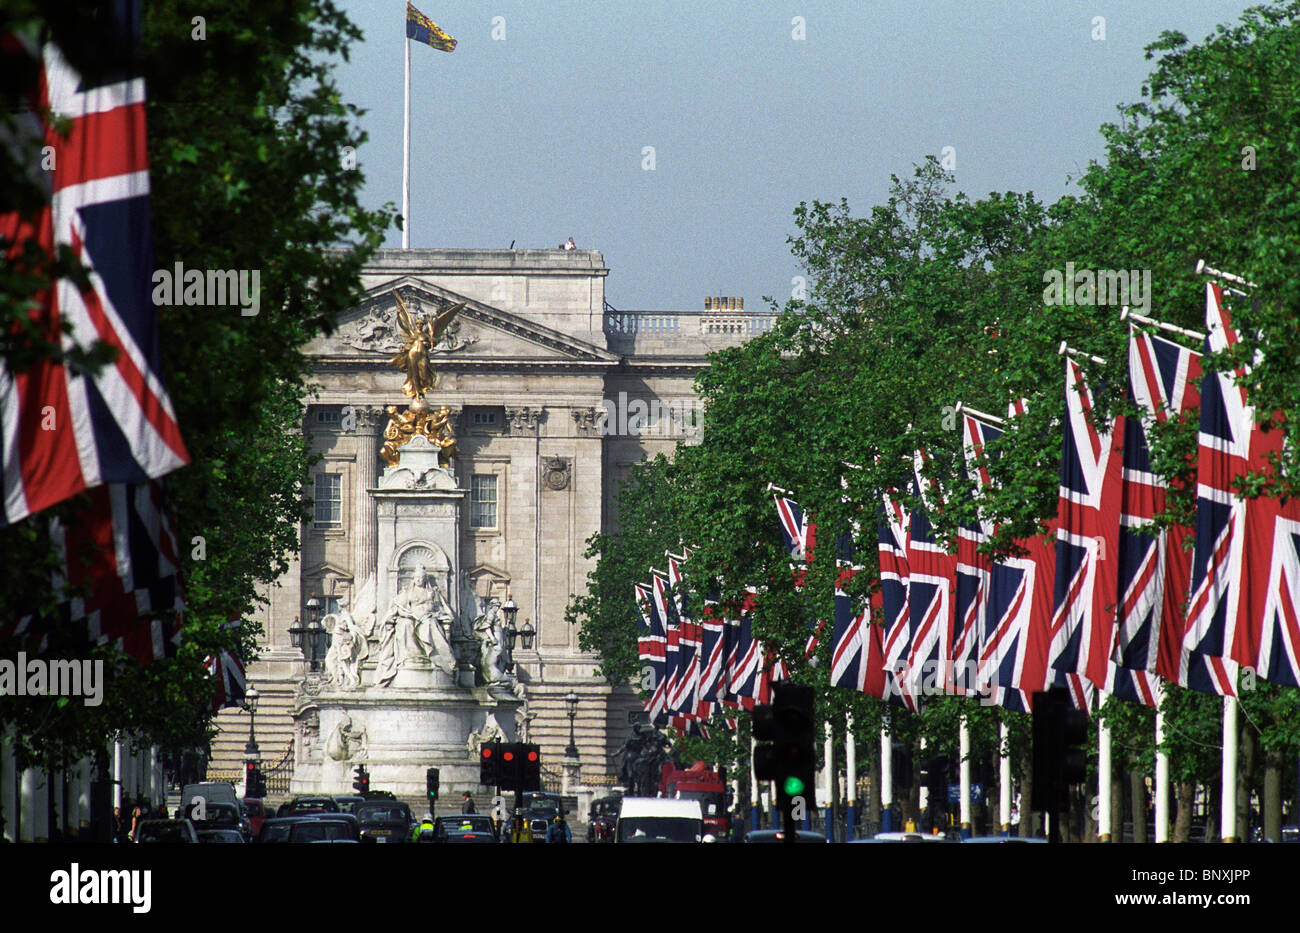 Buckingham Palace,London,England. Union Jack flags fly from gaffs on The Mall leading to the London residence of Her Majesty Qu Stock Photo